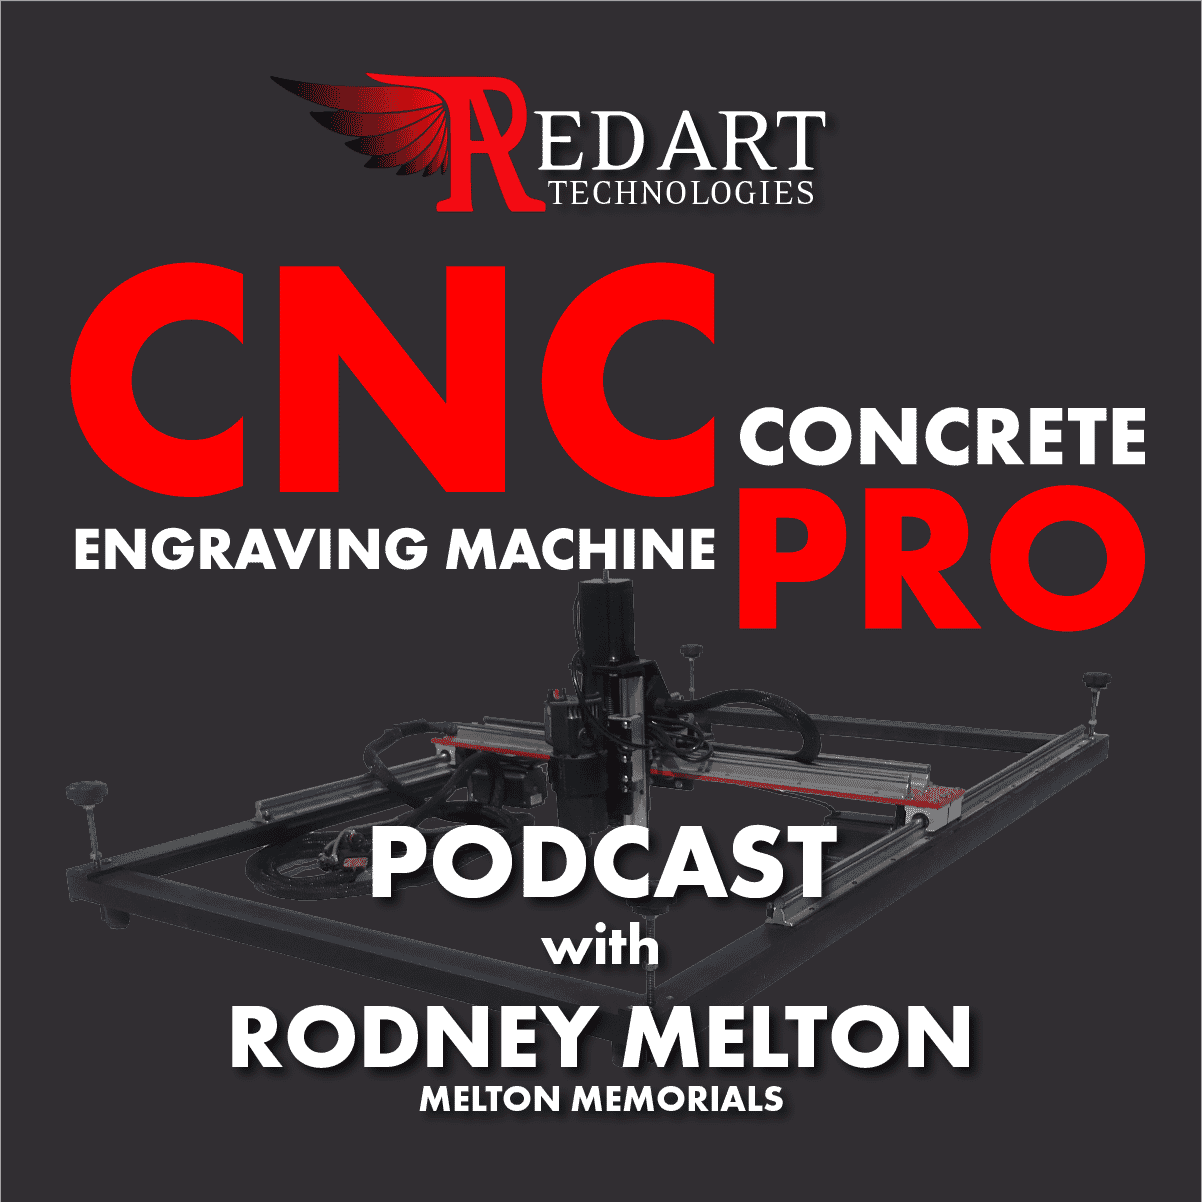 Interview with CNC Pro owner Rodney Melton